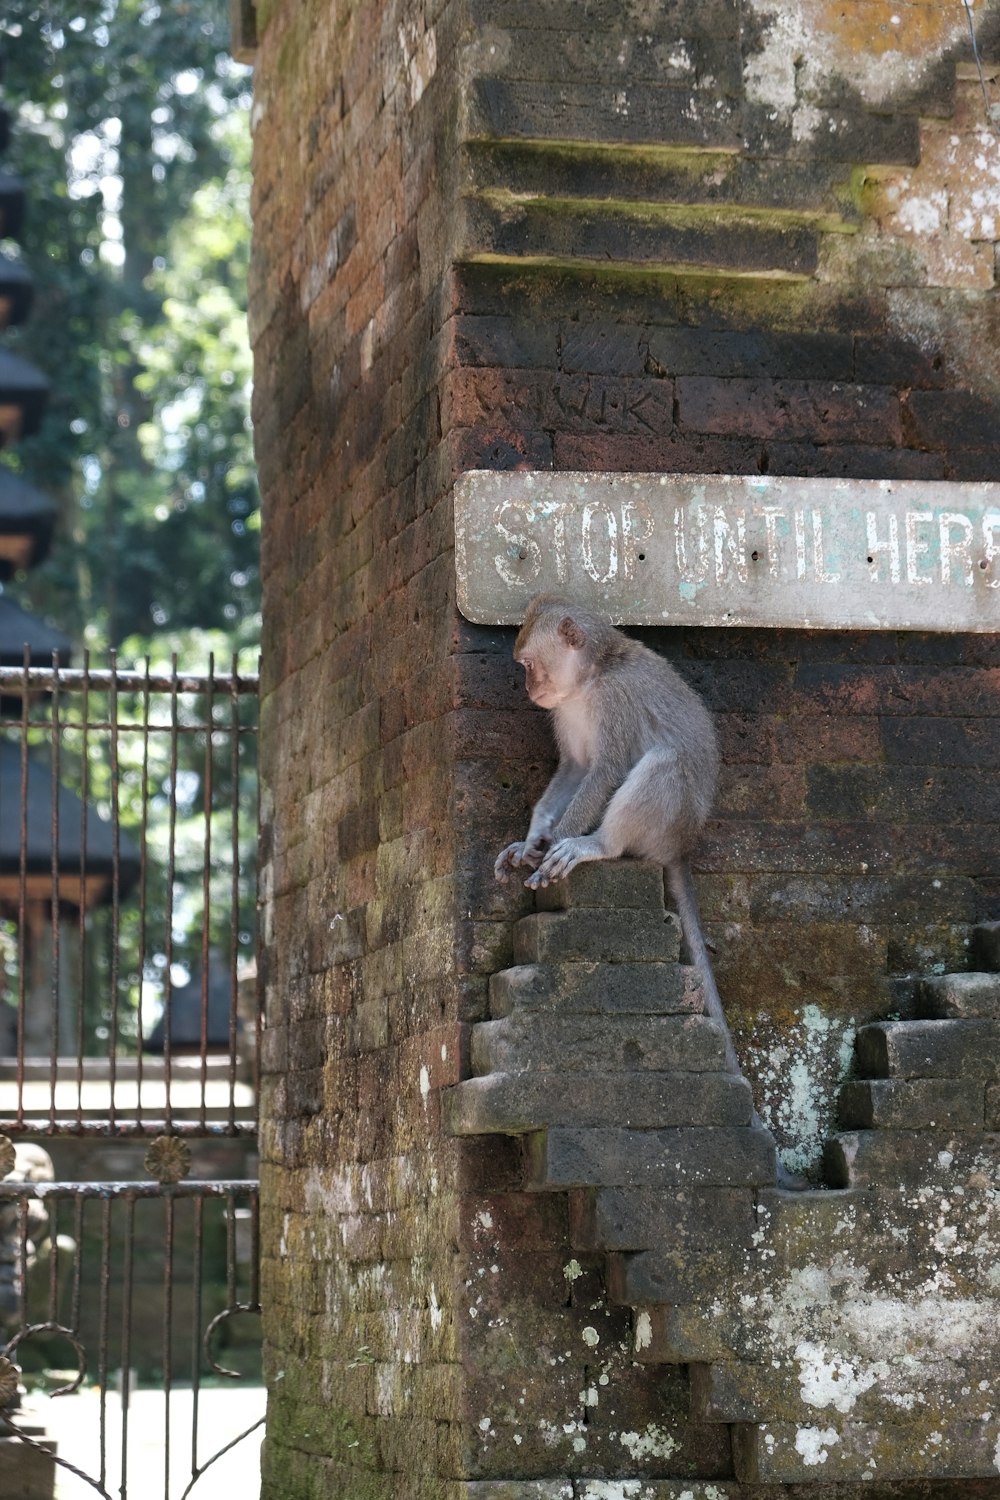 a monkey that is sitting on some steps